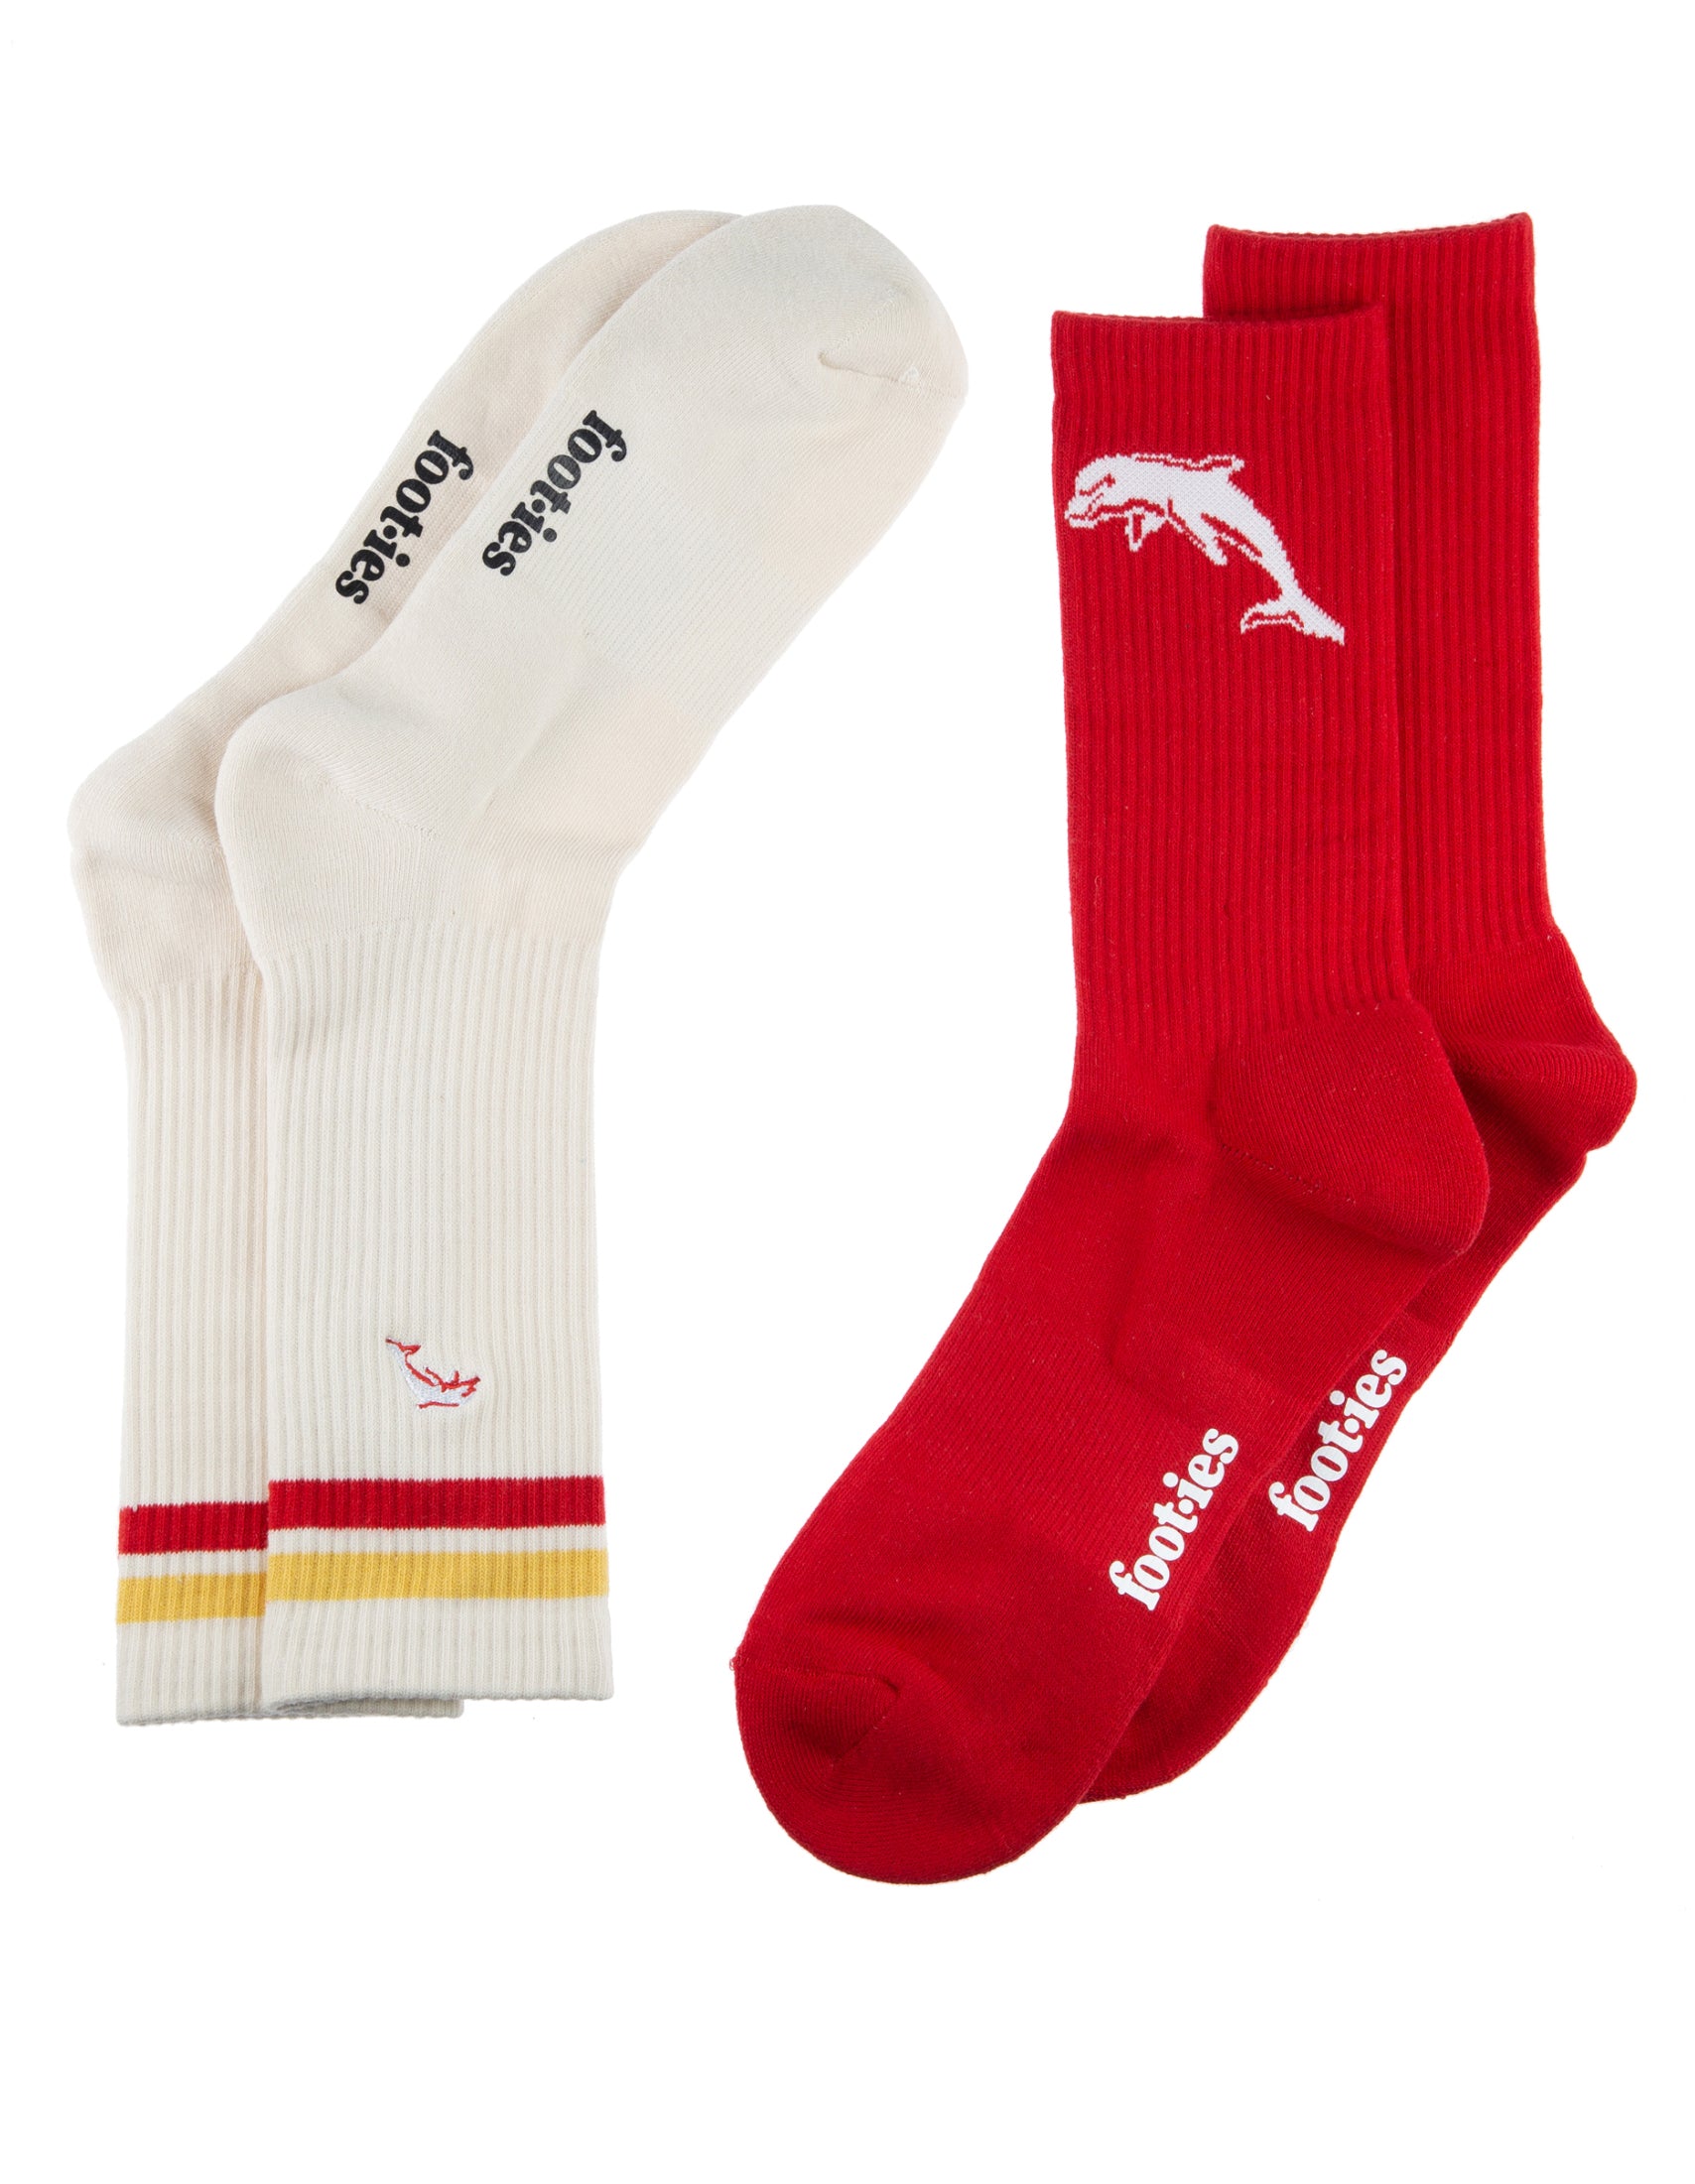 Redcliffe Dolphins Icons Sneaker Socks 2 Pack